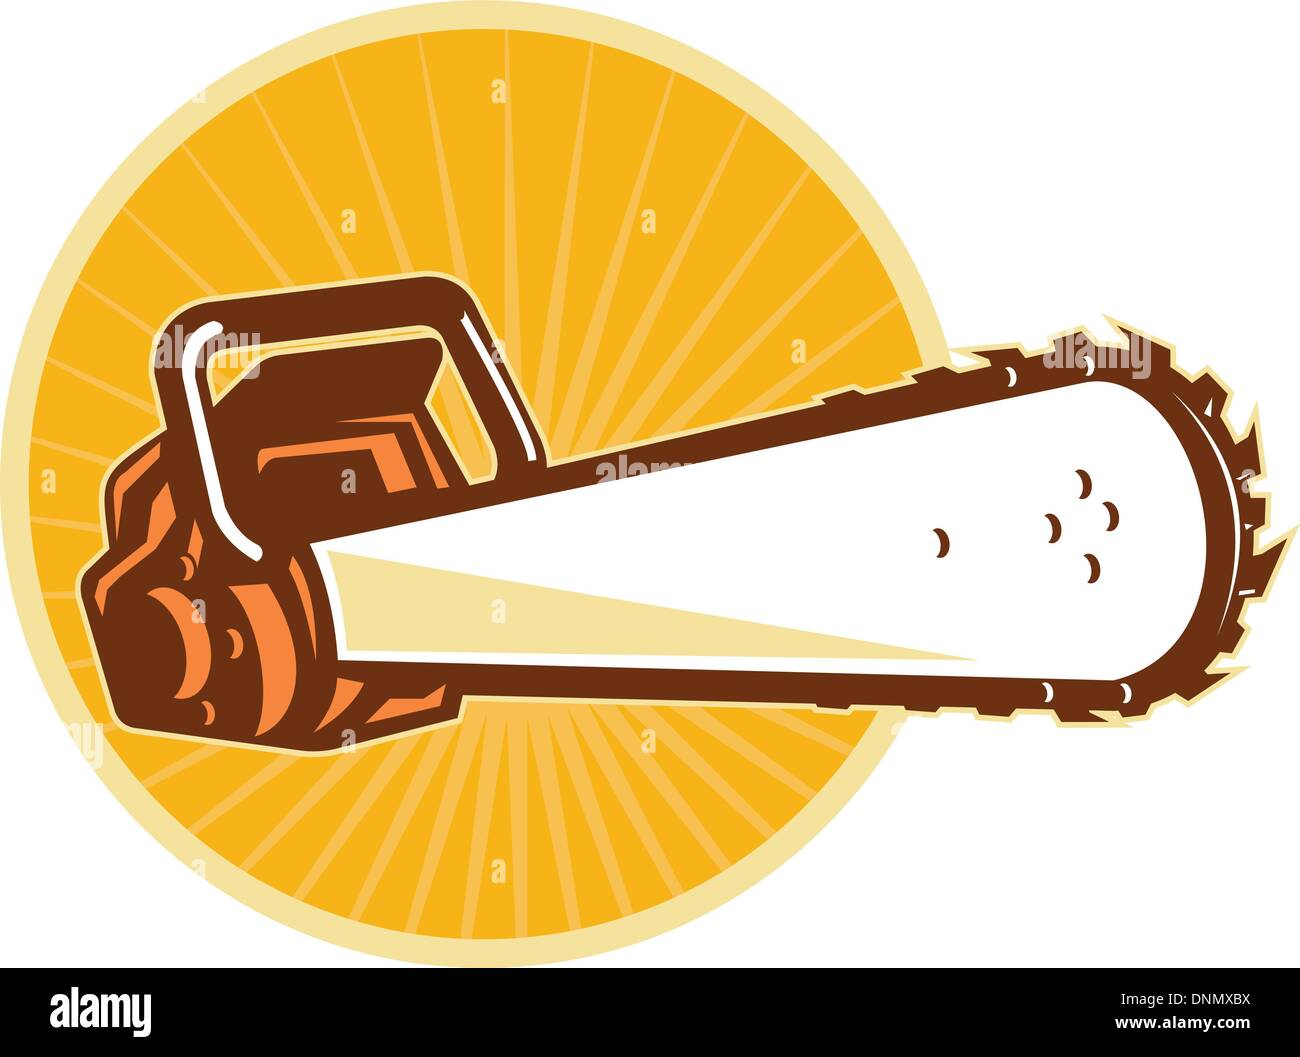 vector illustration of a chain saw viewed from the front at low angle with sunburst and circle in the background Stock Vector